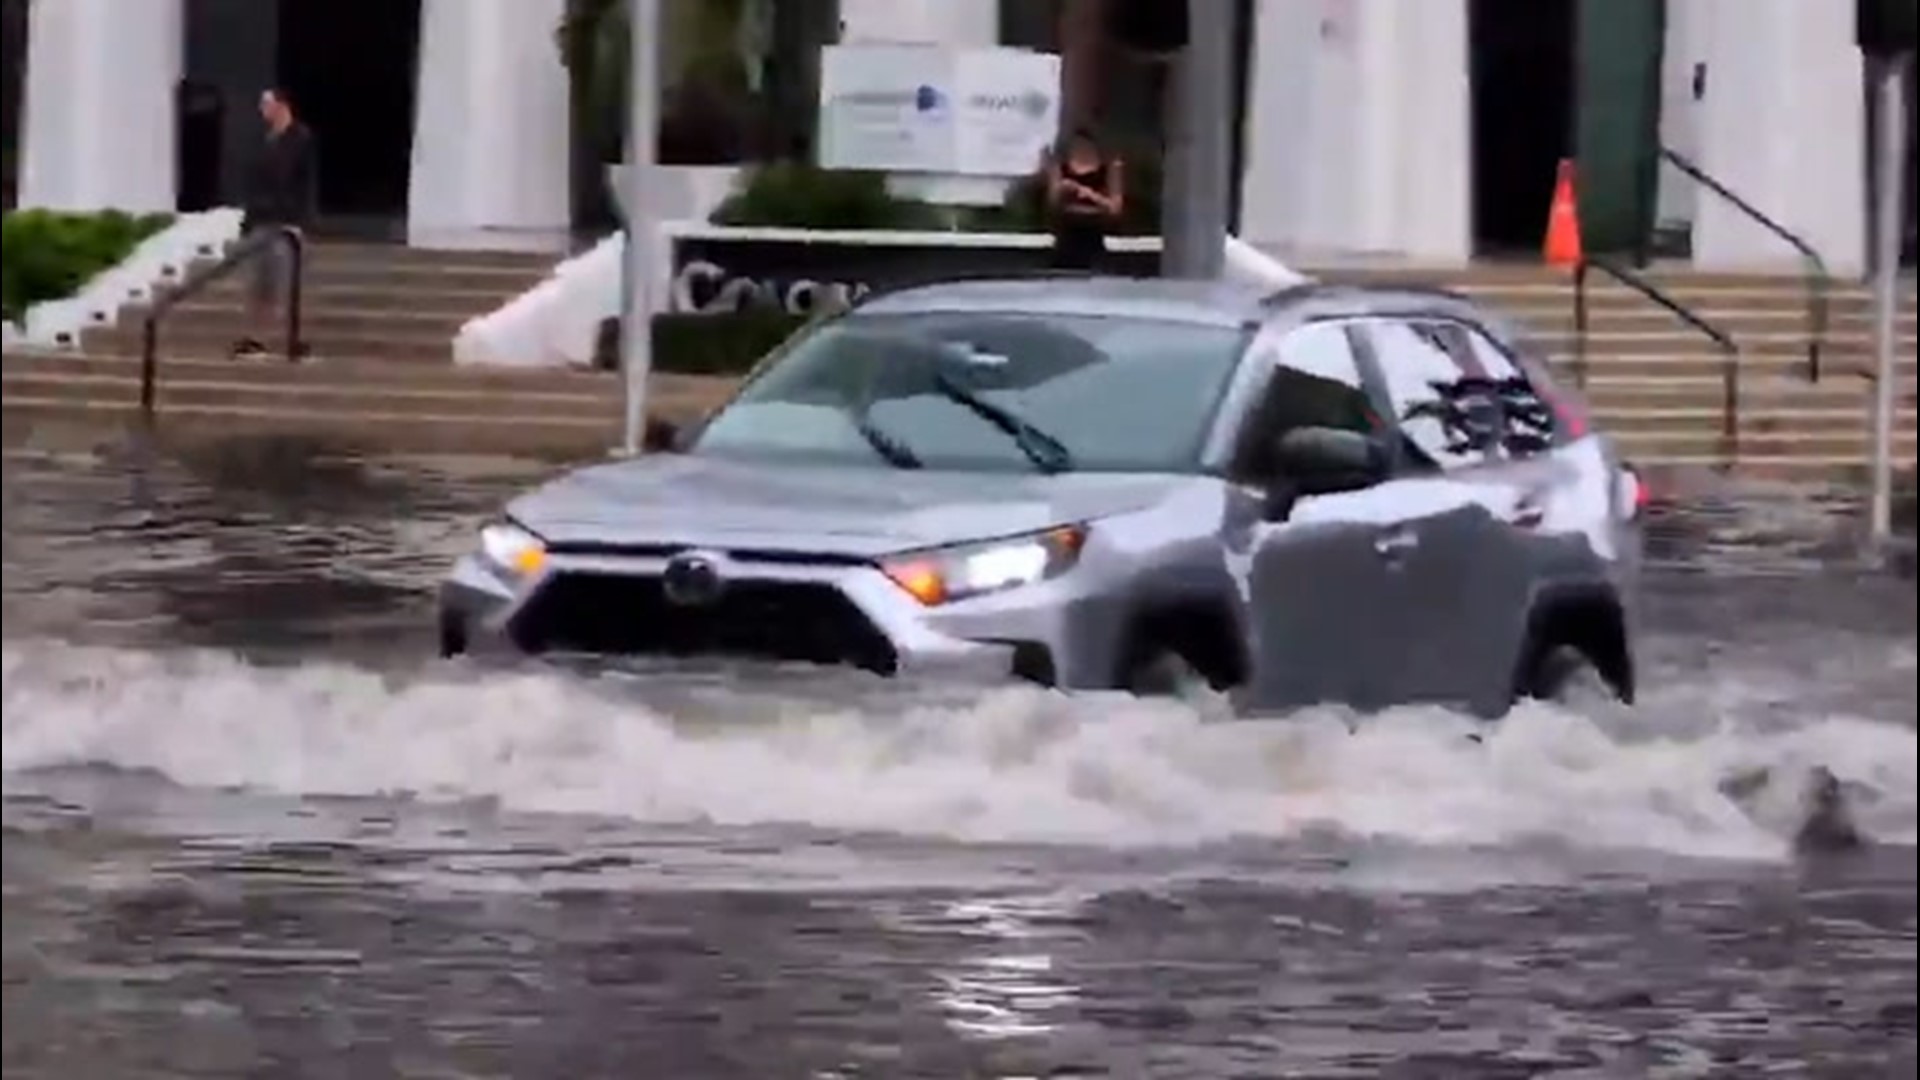 Heavy rainfall inundated the streets of Miami, Florida, with floodwaters. Cars plowed through the flooding causing water to splash everywhere on May 25.